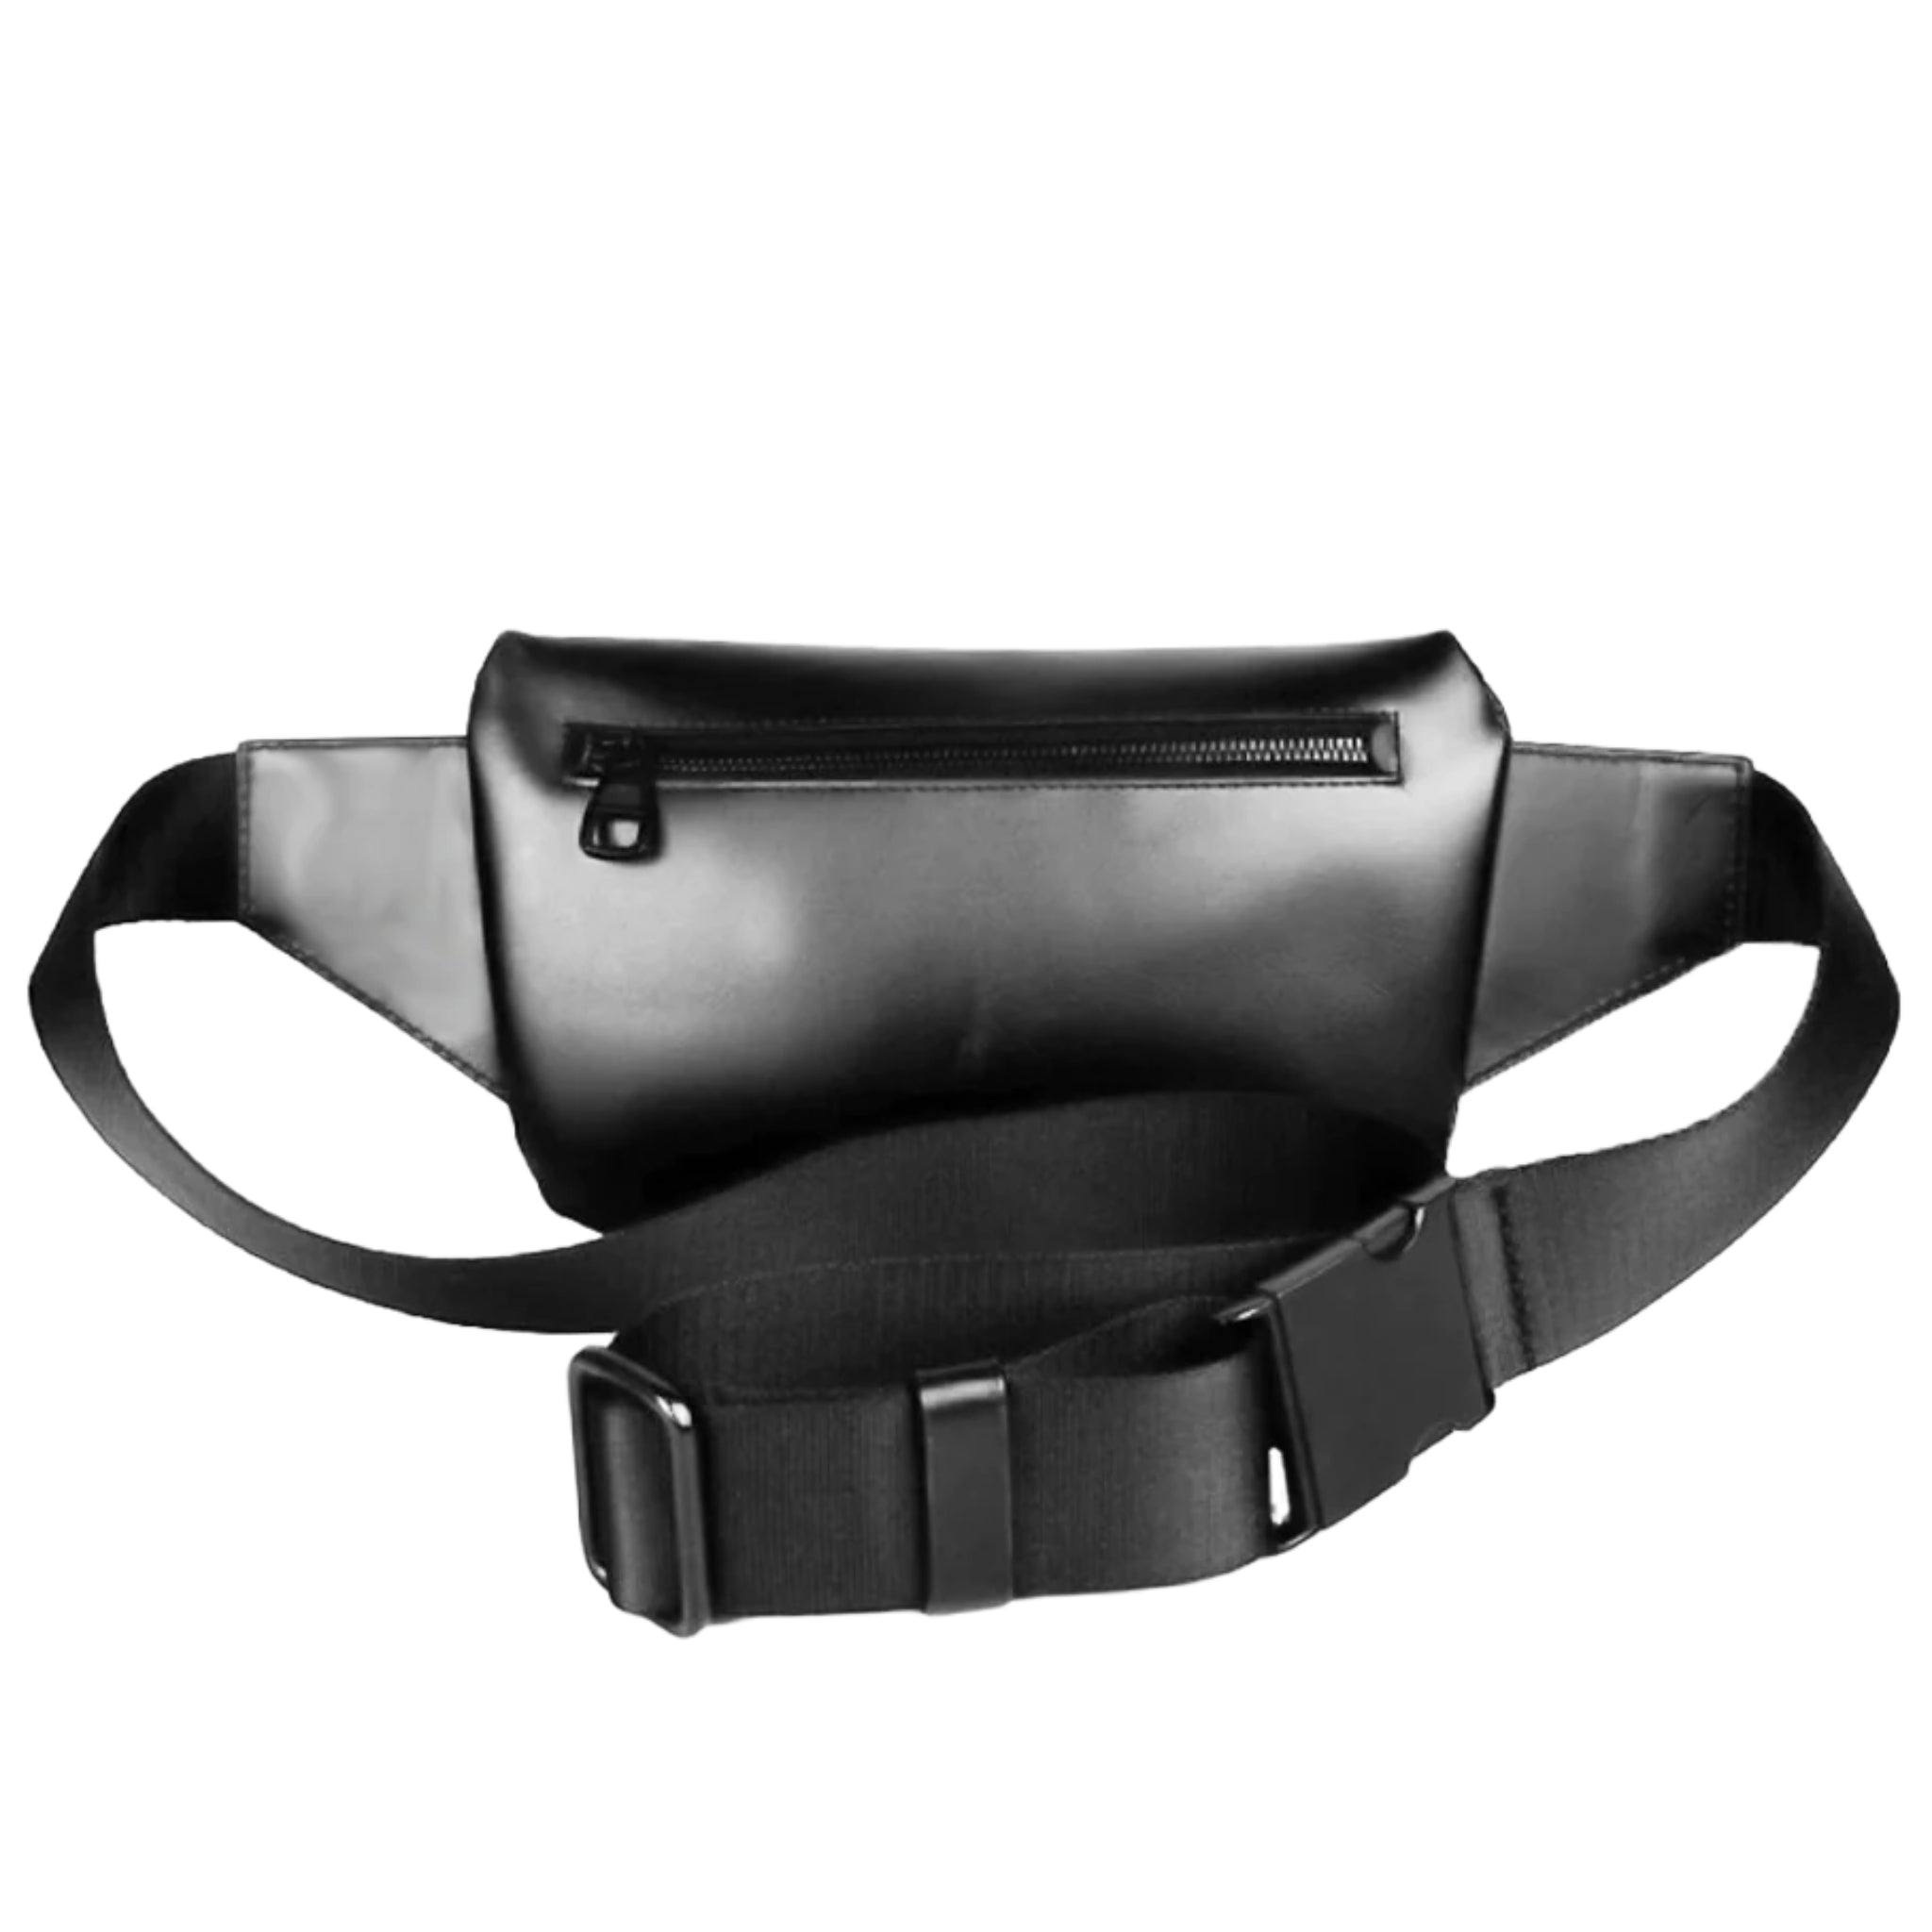 back view of a uilitarian style traditional fanny pack made with Upcycled leather on a whie background.